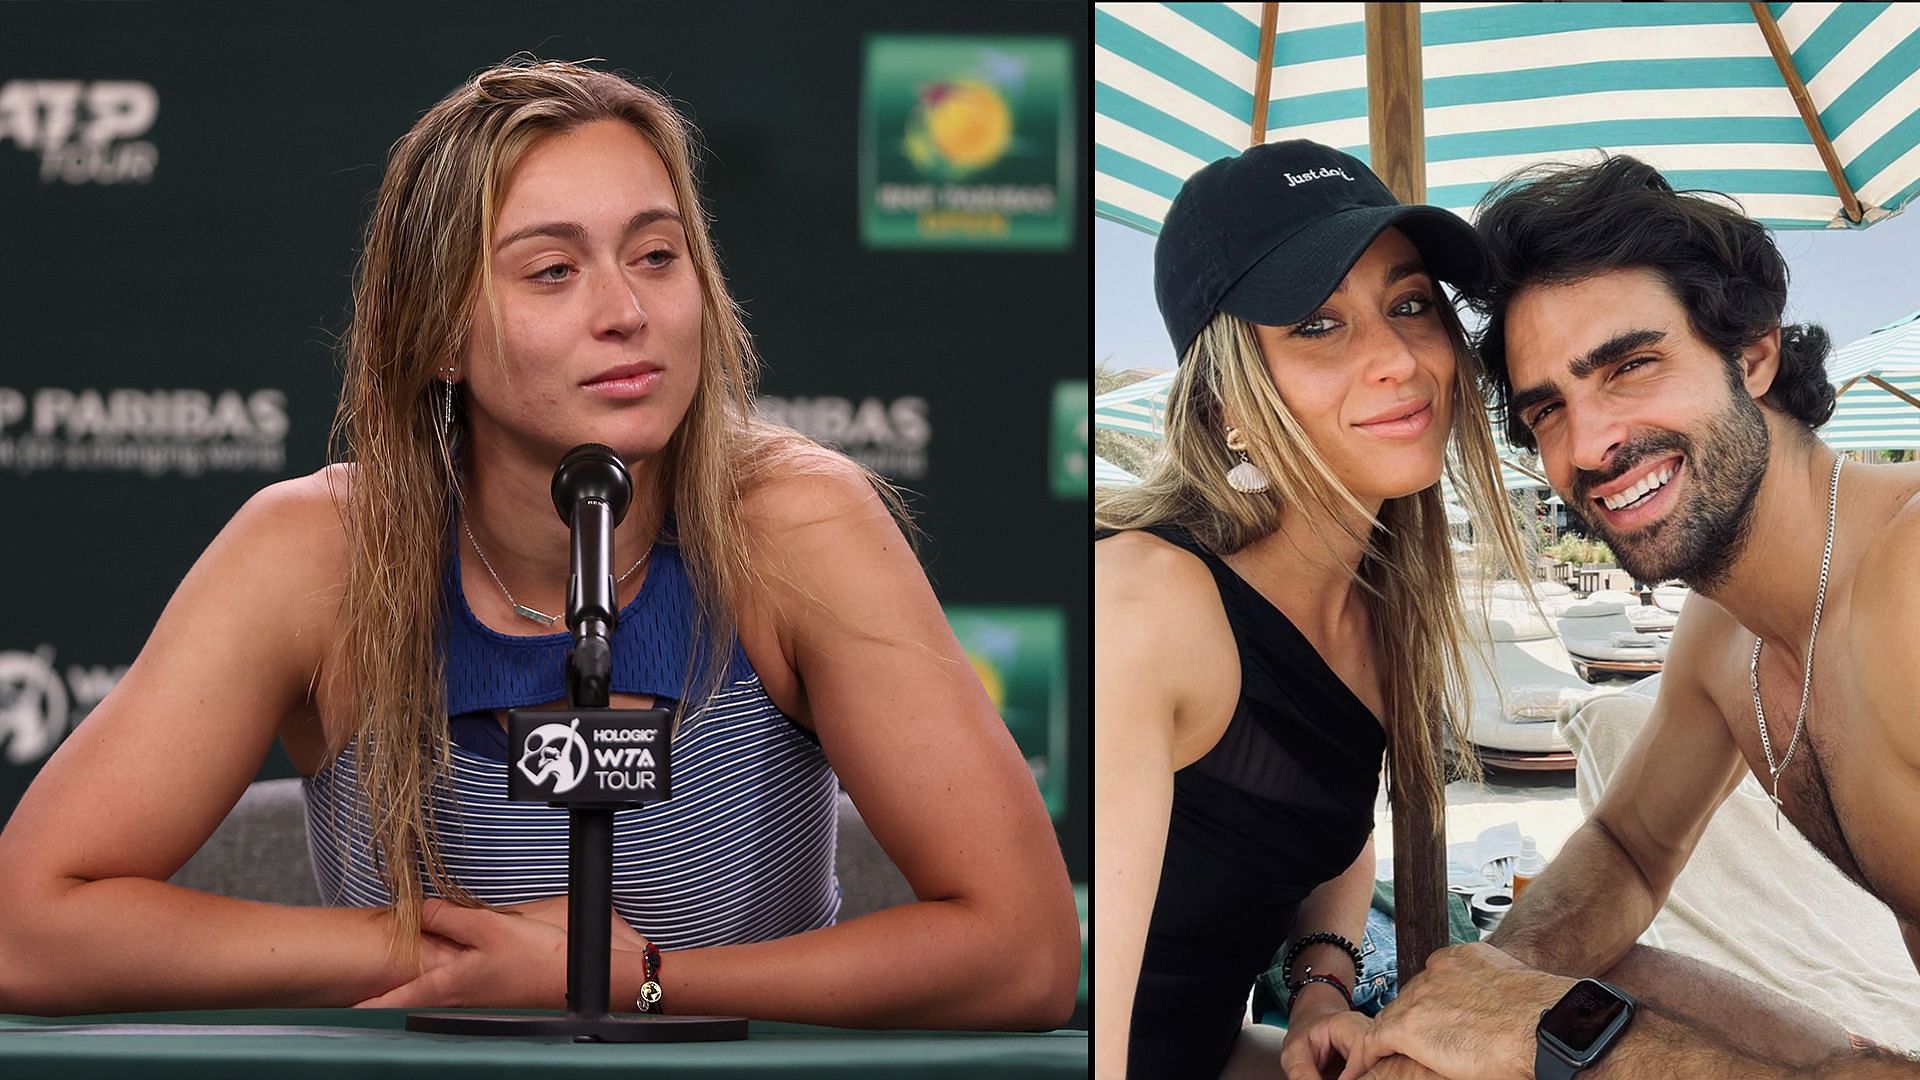 Paula Badosa has opened up about getting judged as a tennis player through her relationship with her boyfriend Juan Betancourt.